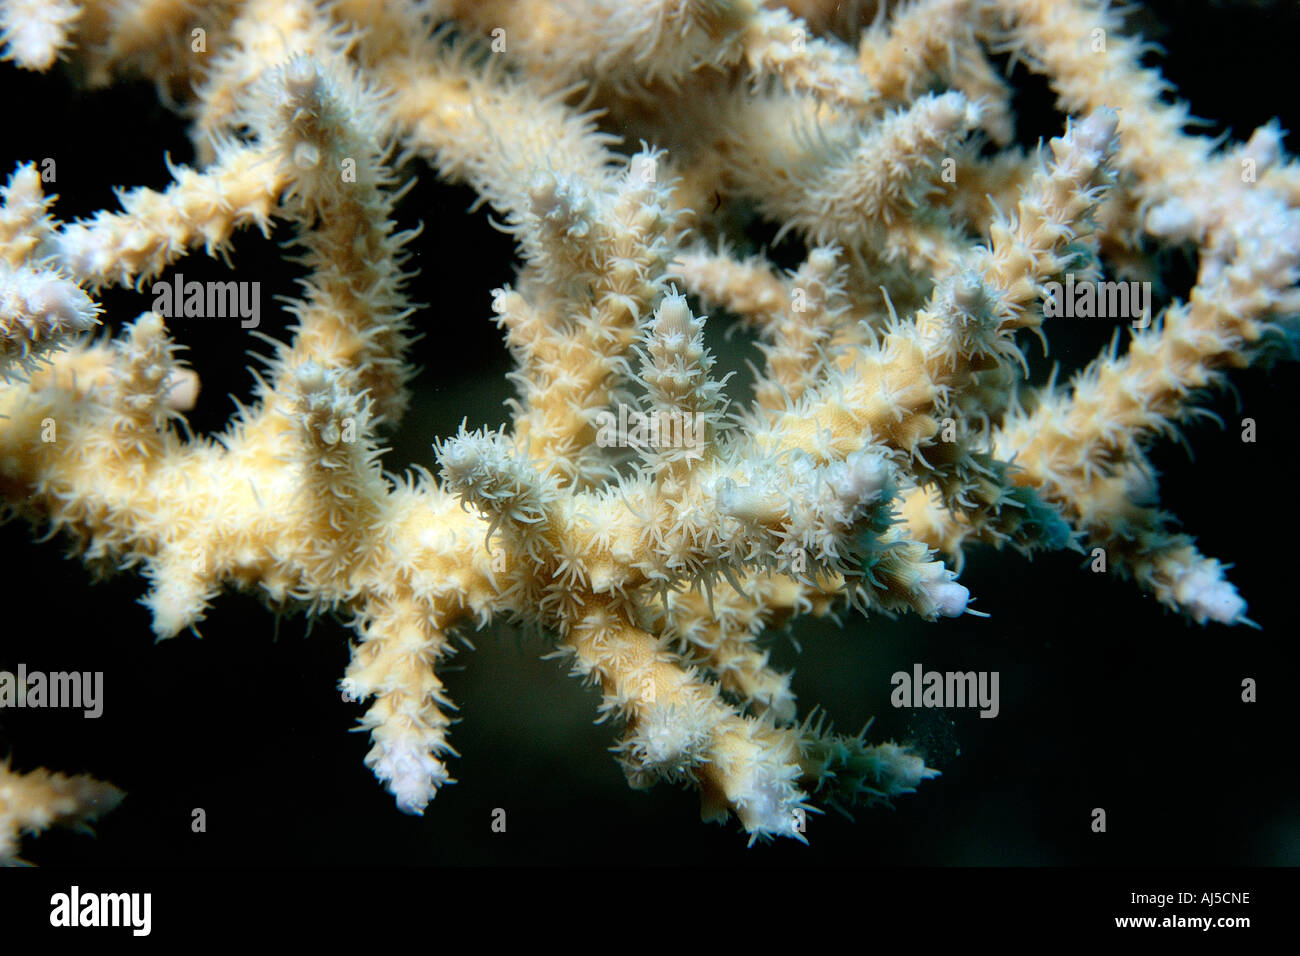 Staghorn coral with polyps extended Acropora sp Ailuk atoll Marshall Islands Pacific Stock Photo